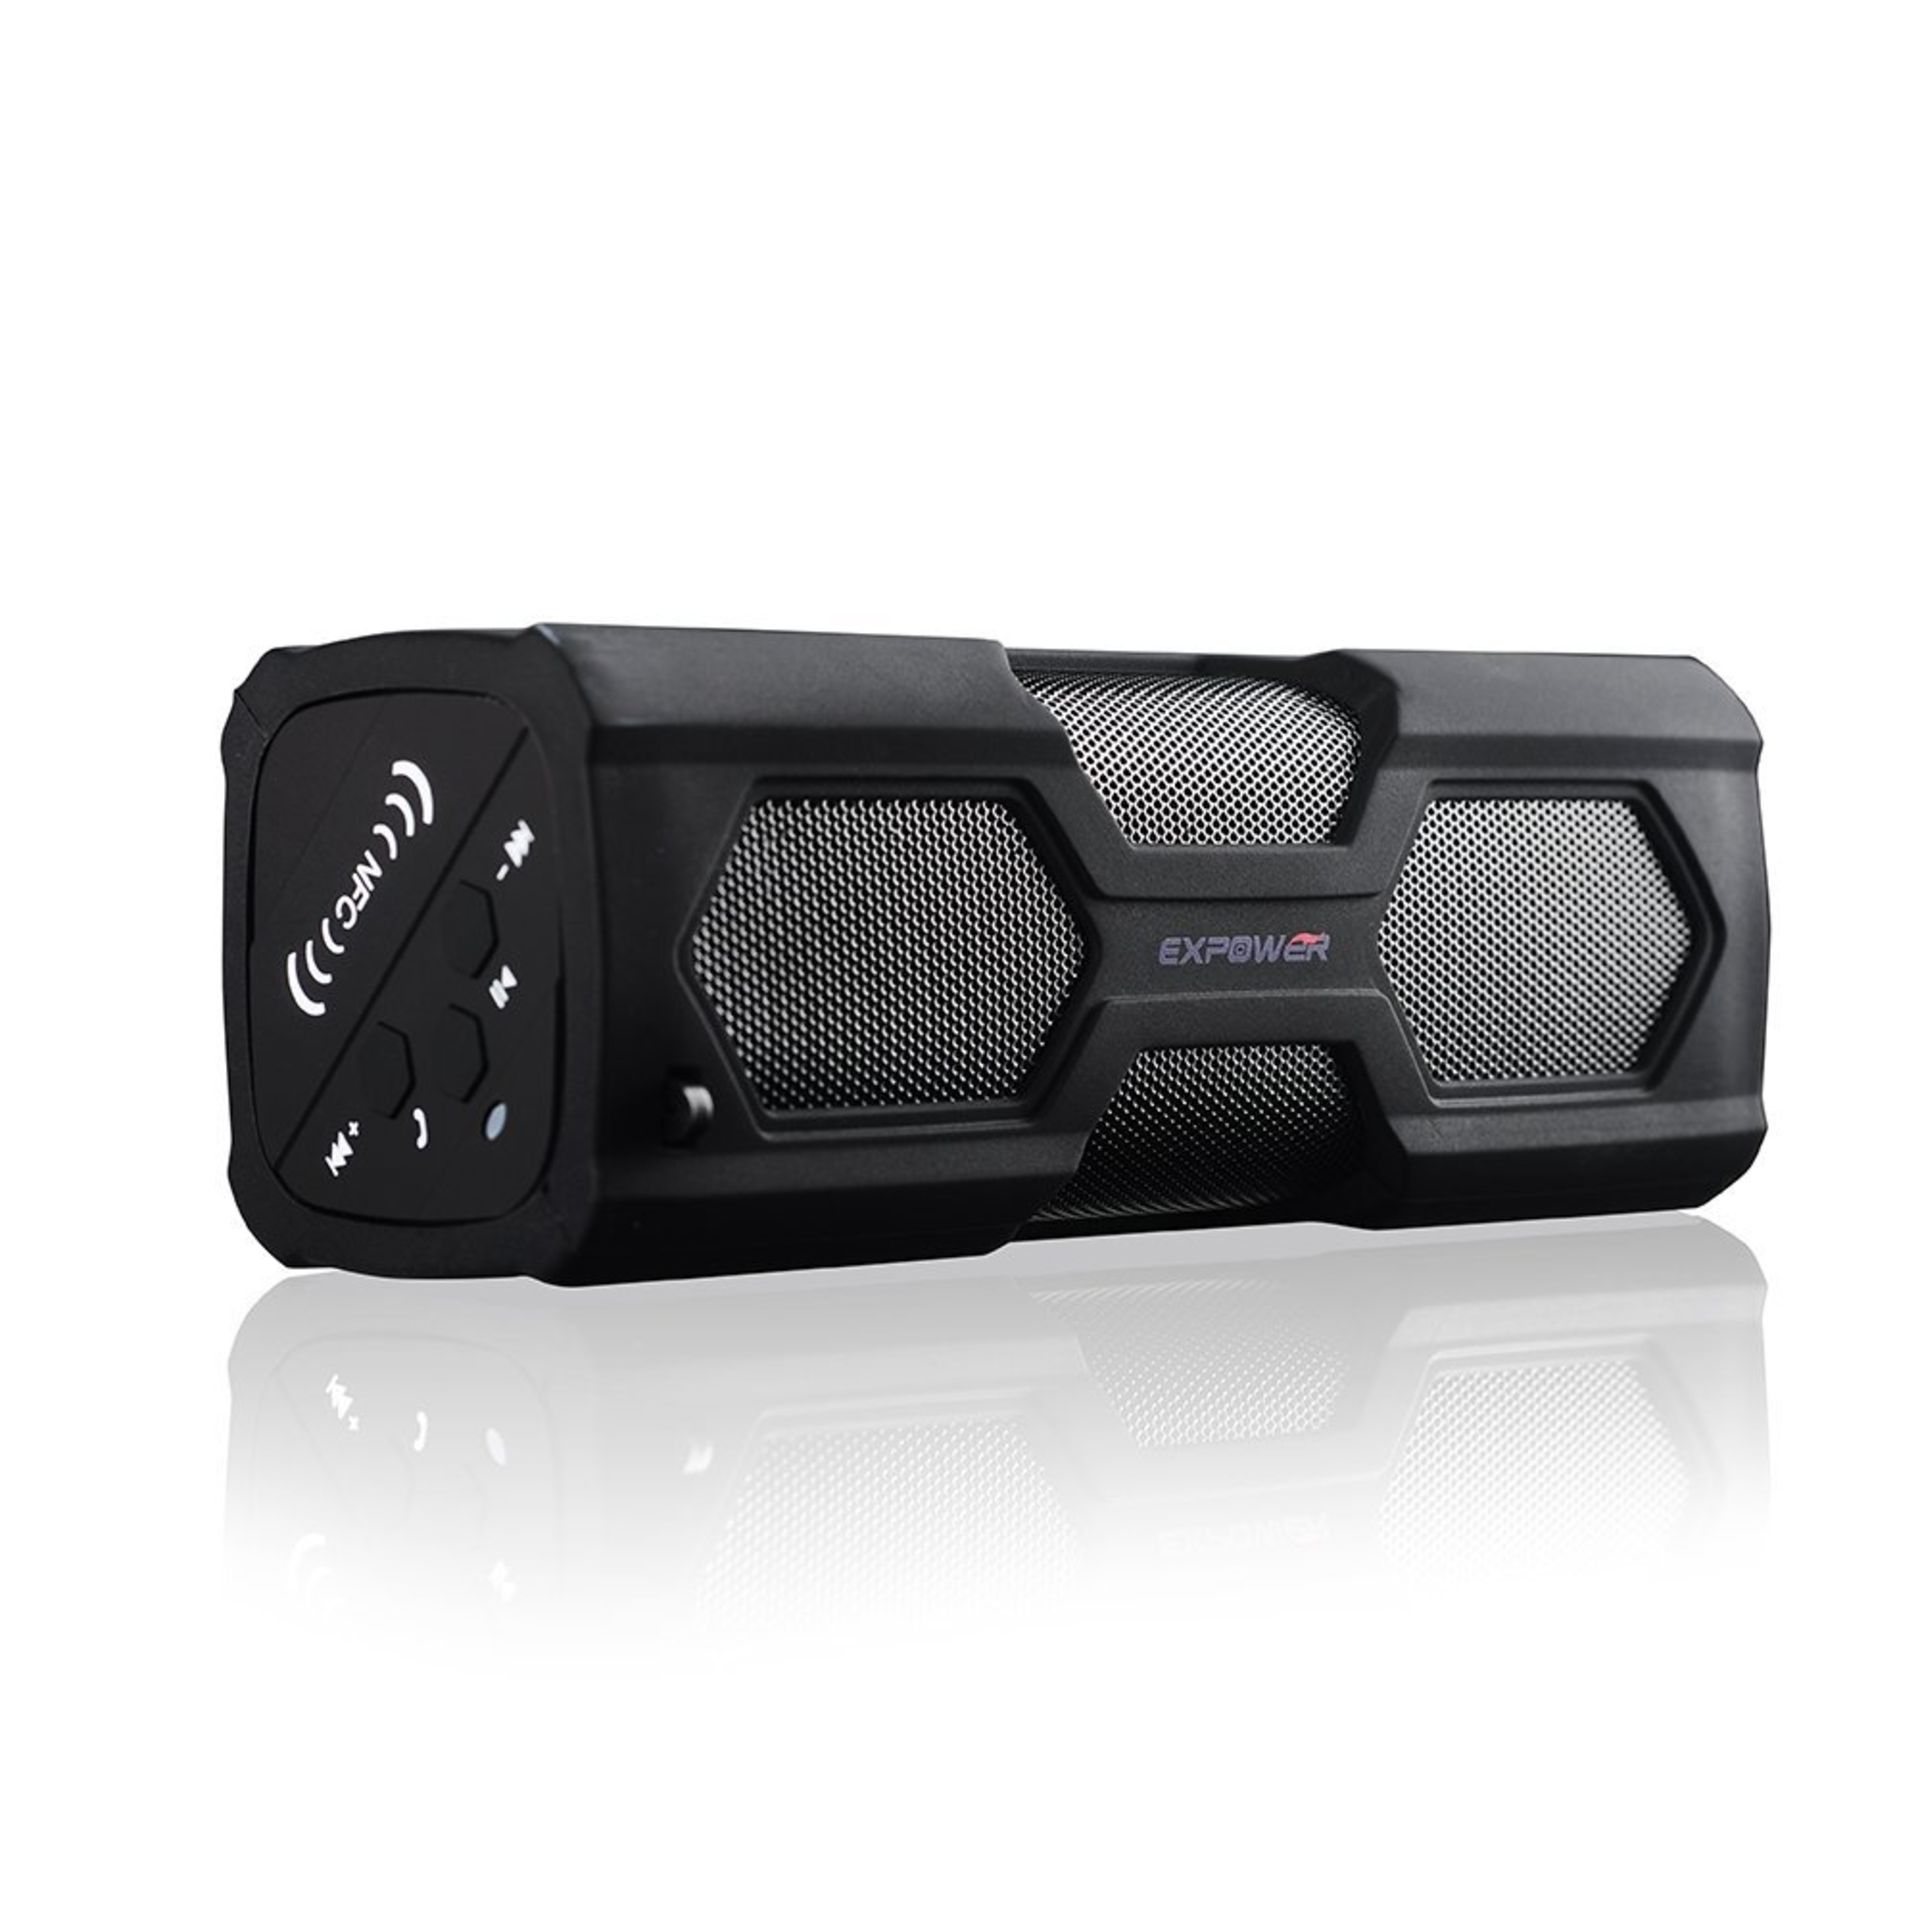 V Brand New Bluetooth Speaker And Power Bank Waterproof And Shockproof - Amazon Price £22.99 X 2